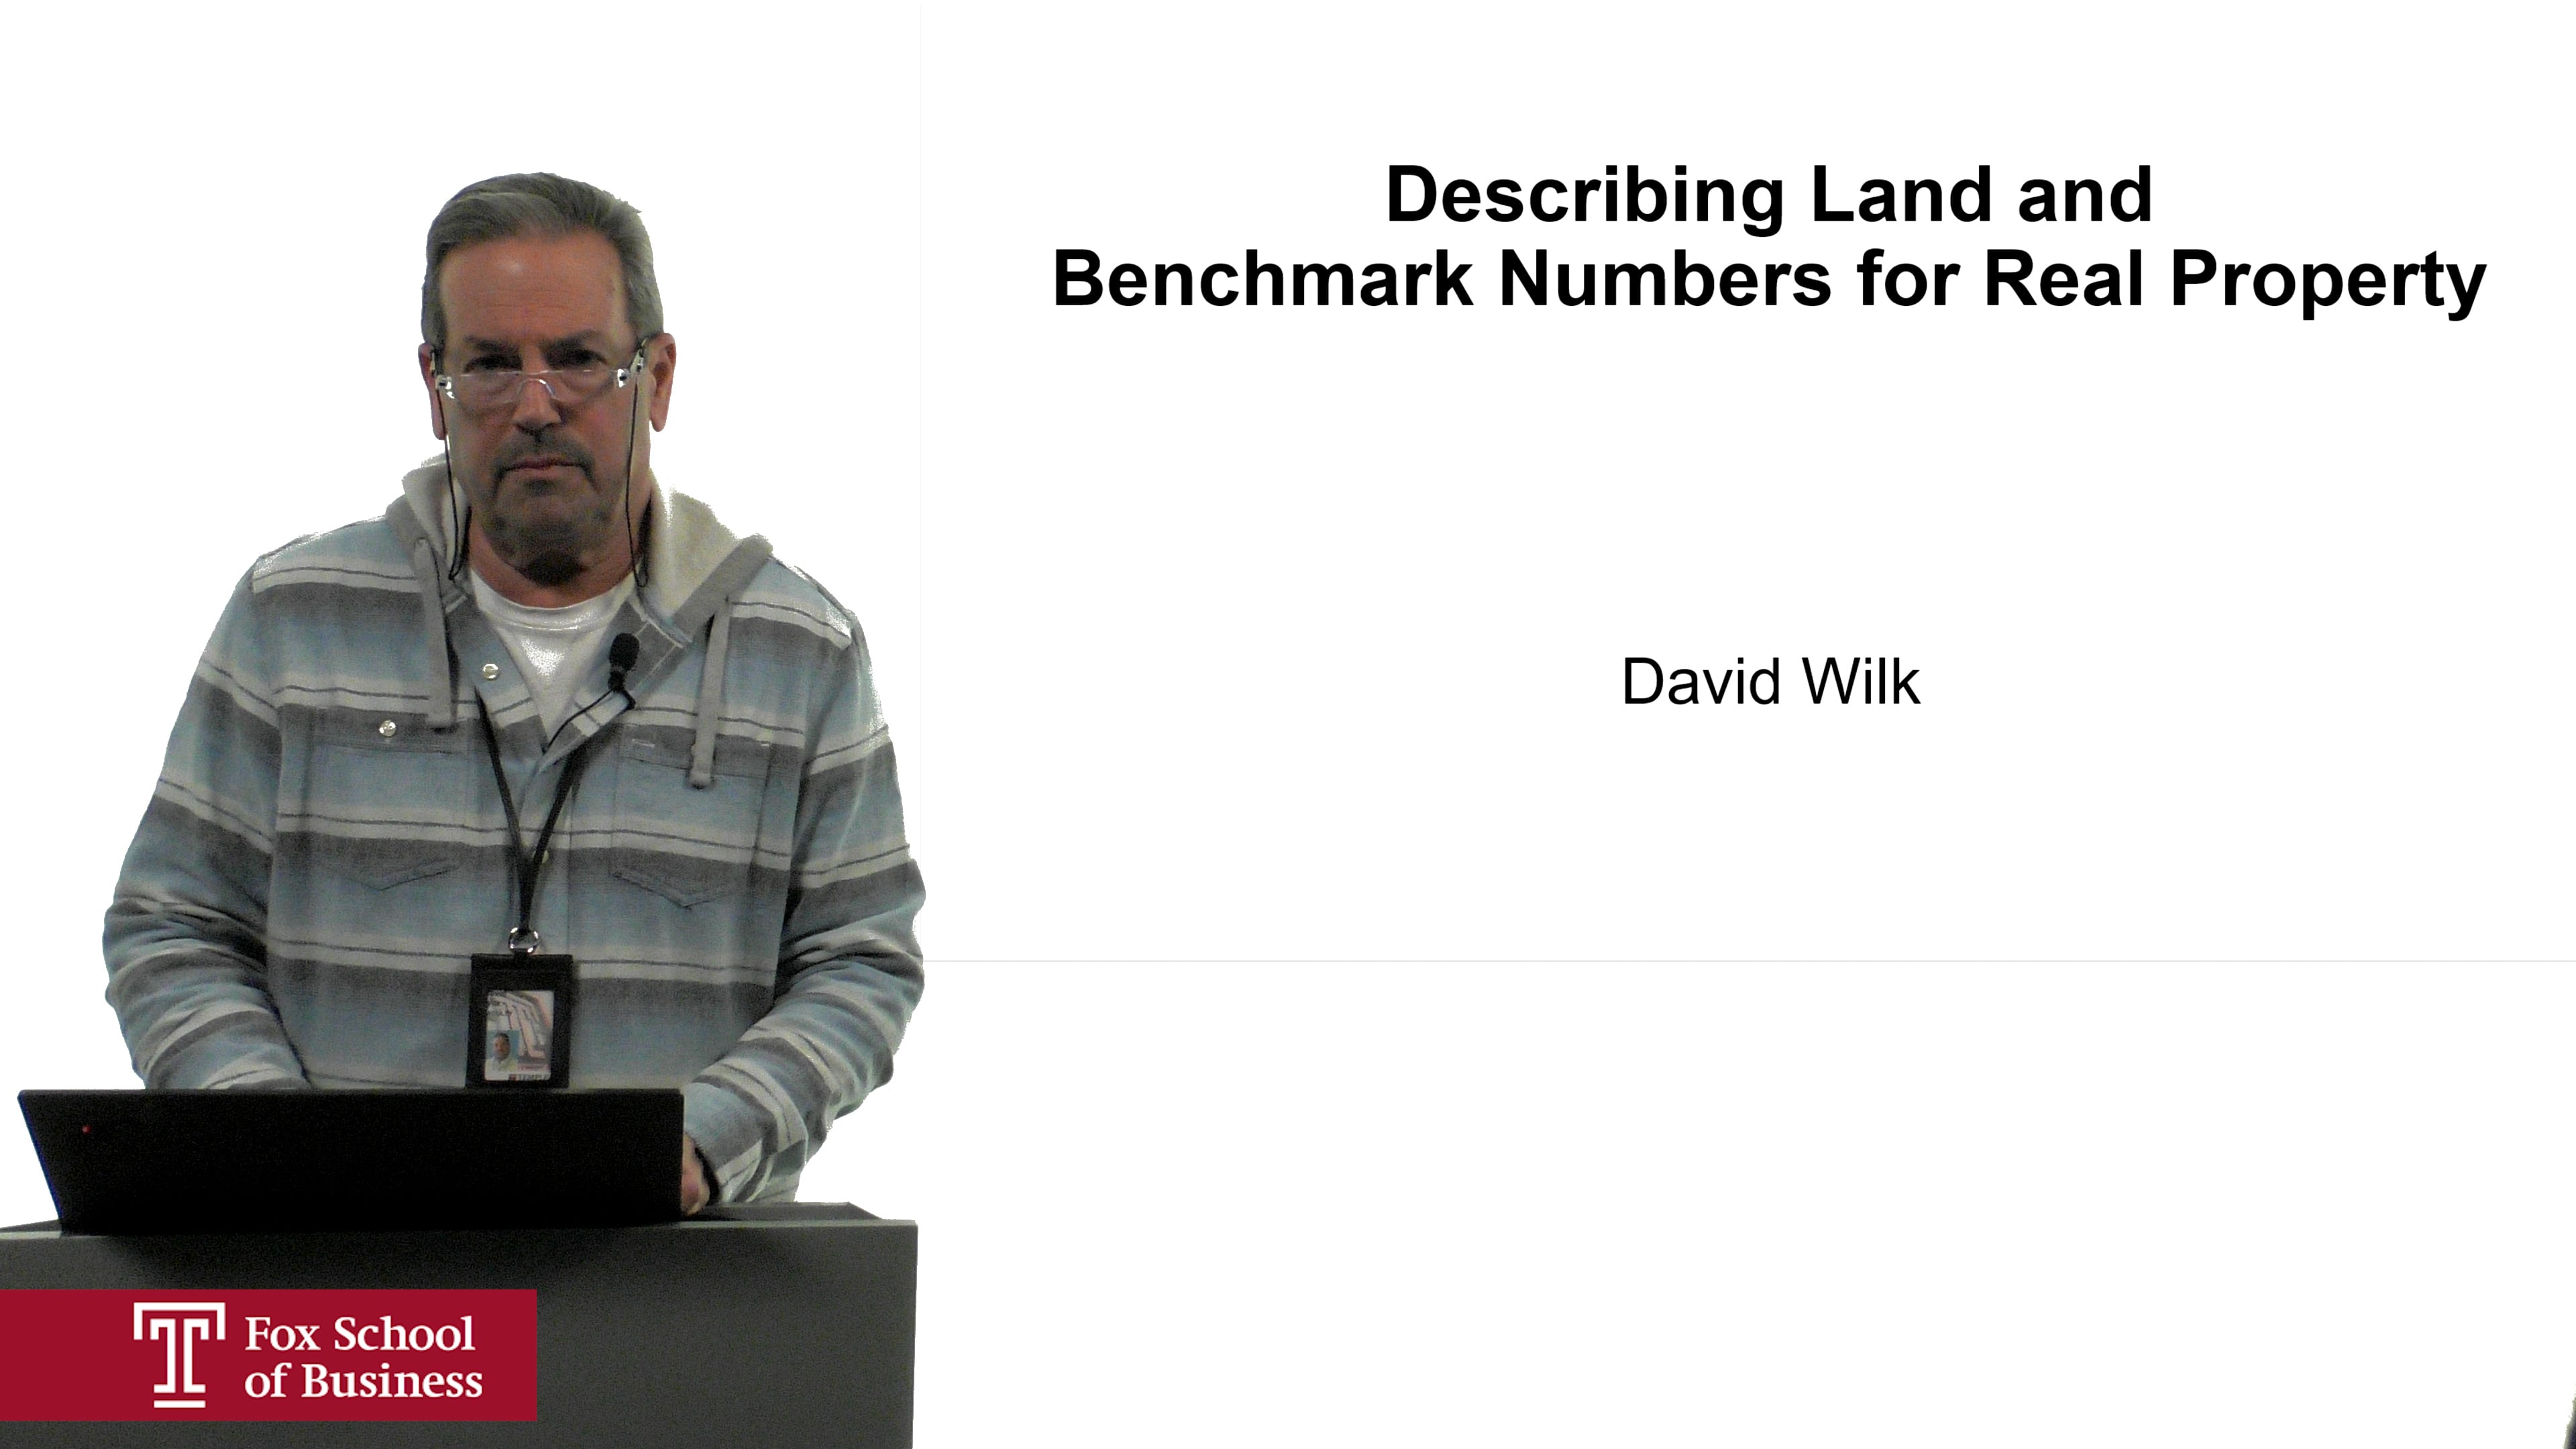 Describing Land and Benchmark Numbers for Real Property